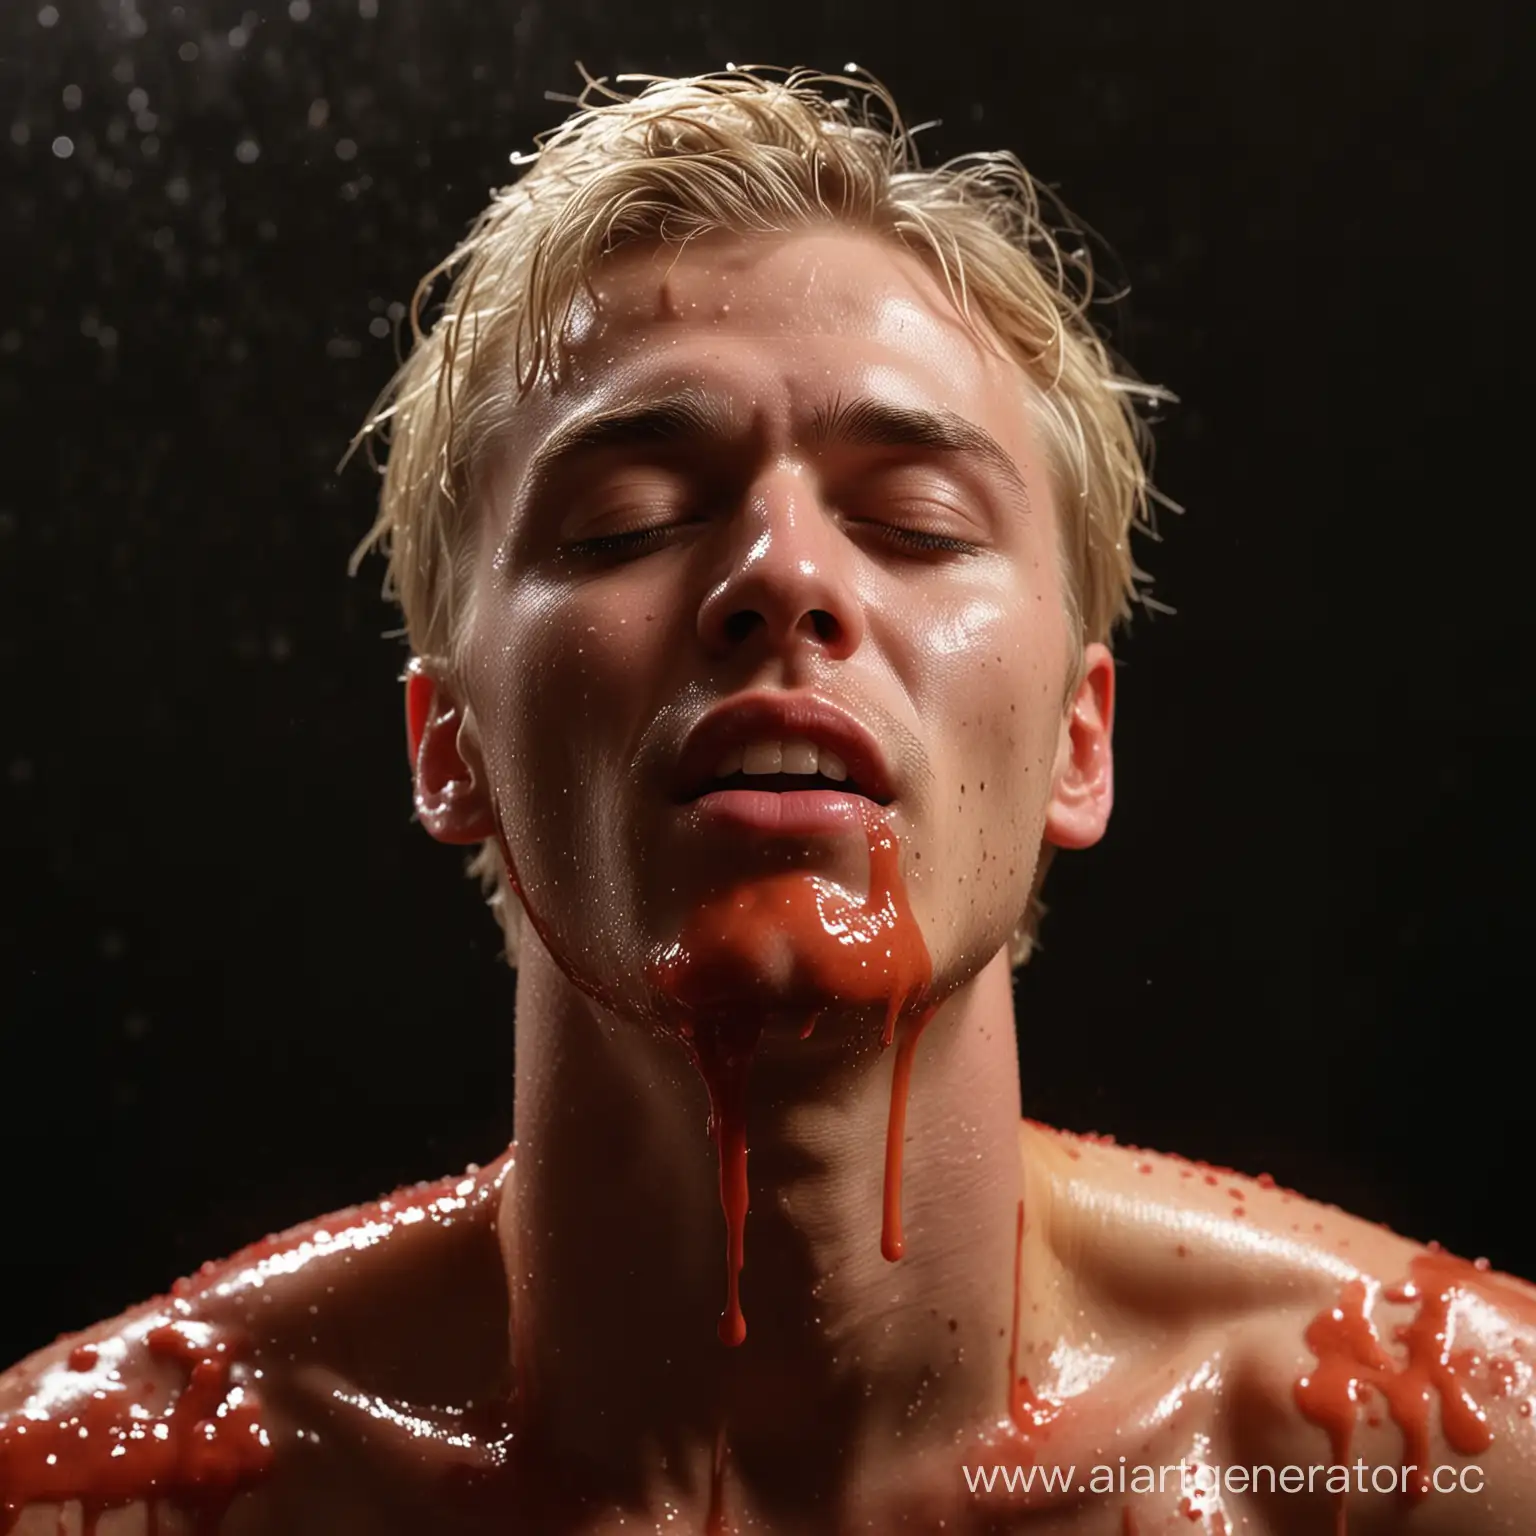 Blonde-Man-Covered-in-Red-Liquid-Looking-at-Camera-in-Dark-Background